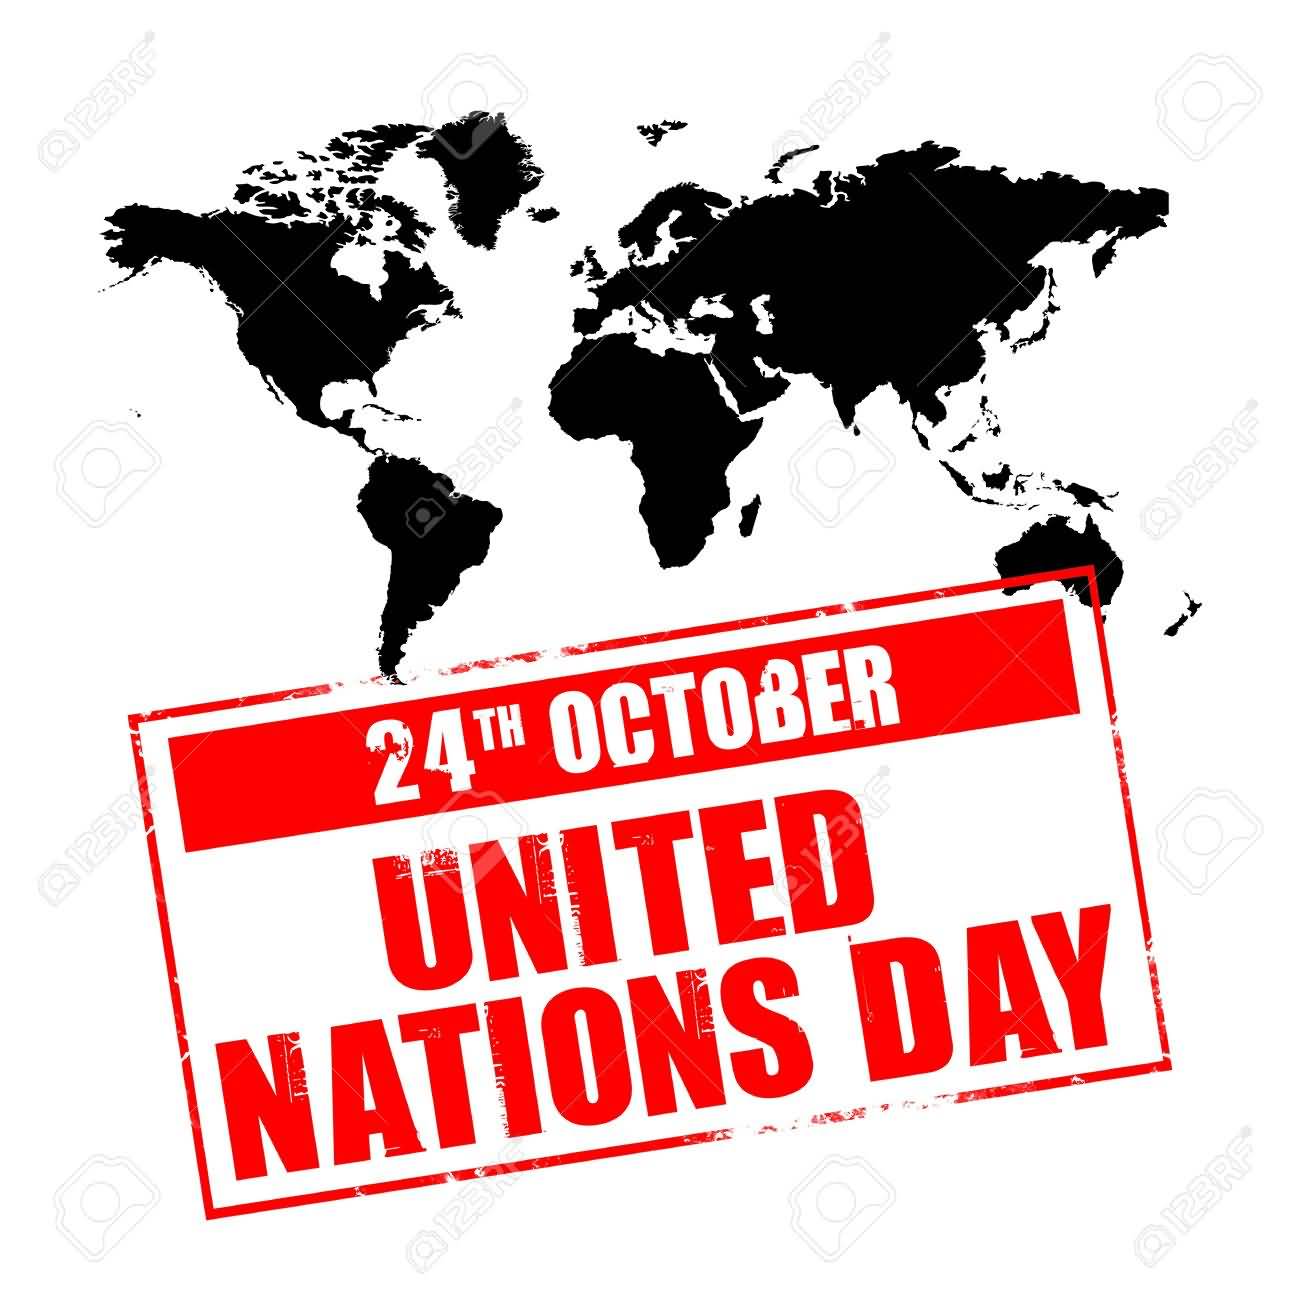 24th October United Nations Day Wishes Picture